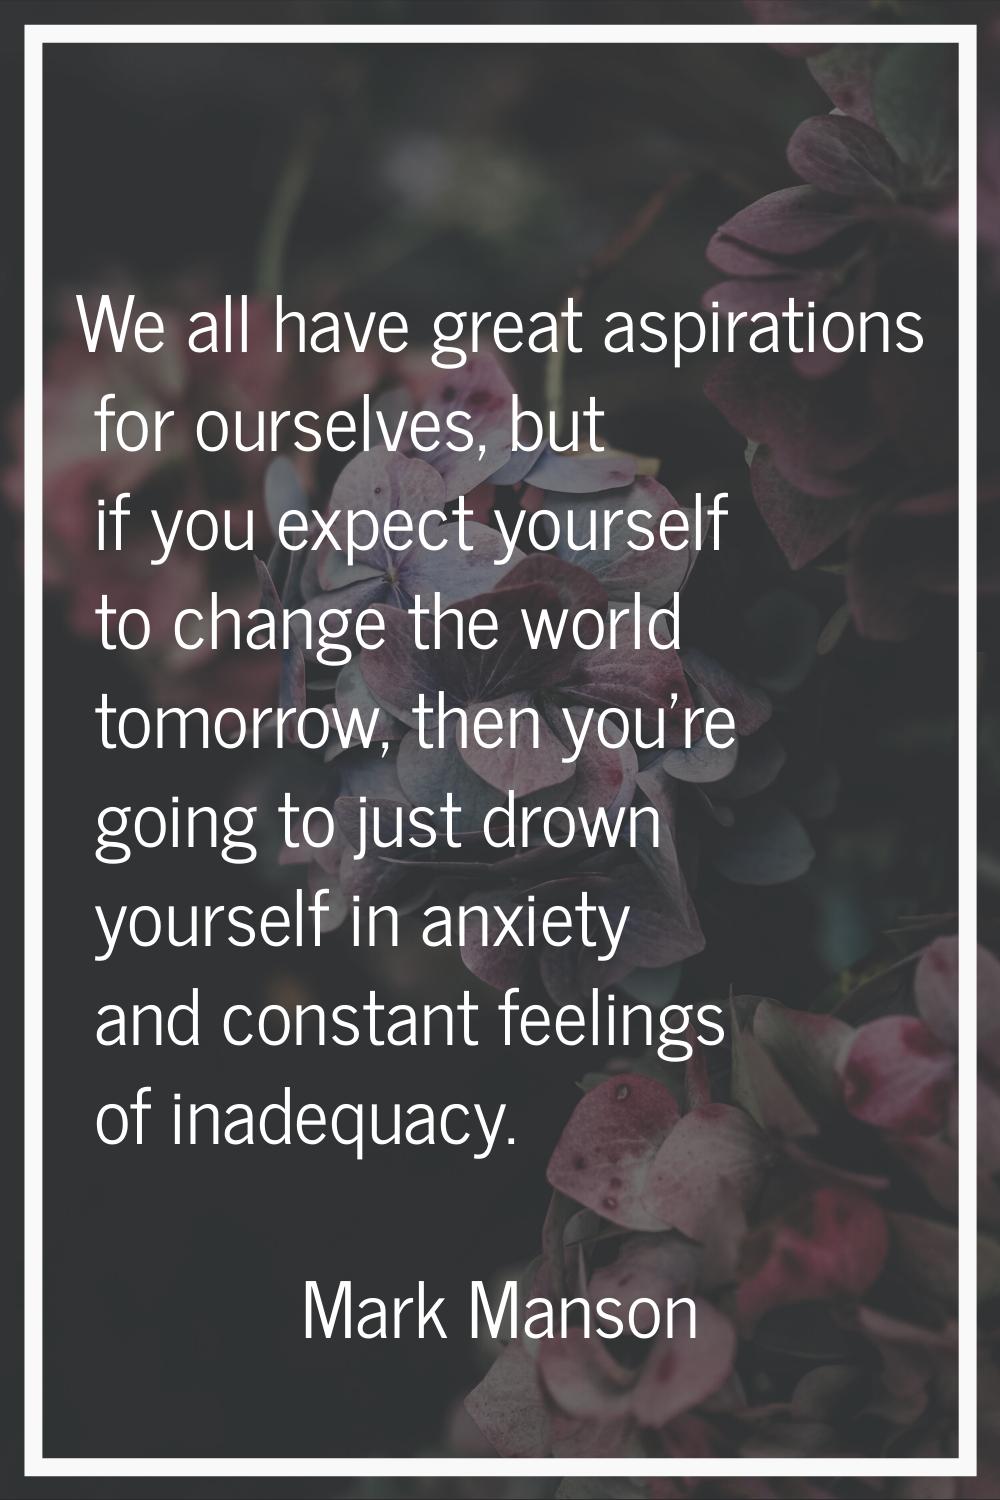 We all have great aspirations for ourselves, but if you expect yourself to change the world tomorro